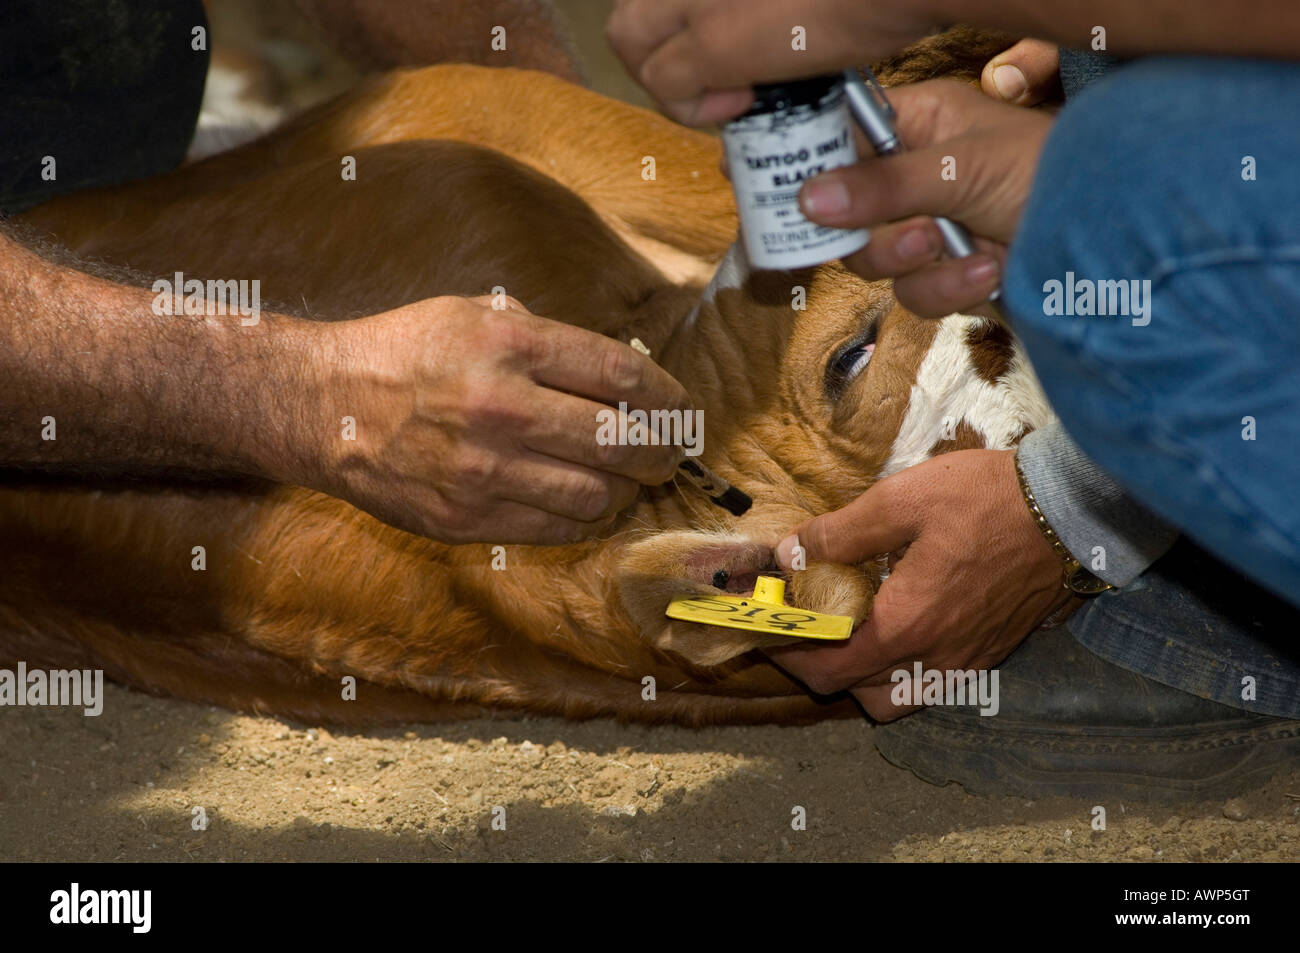 Calf's ear being disinfected after ear-tagging, Costa Rica, Central America Stock Photo